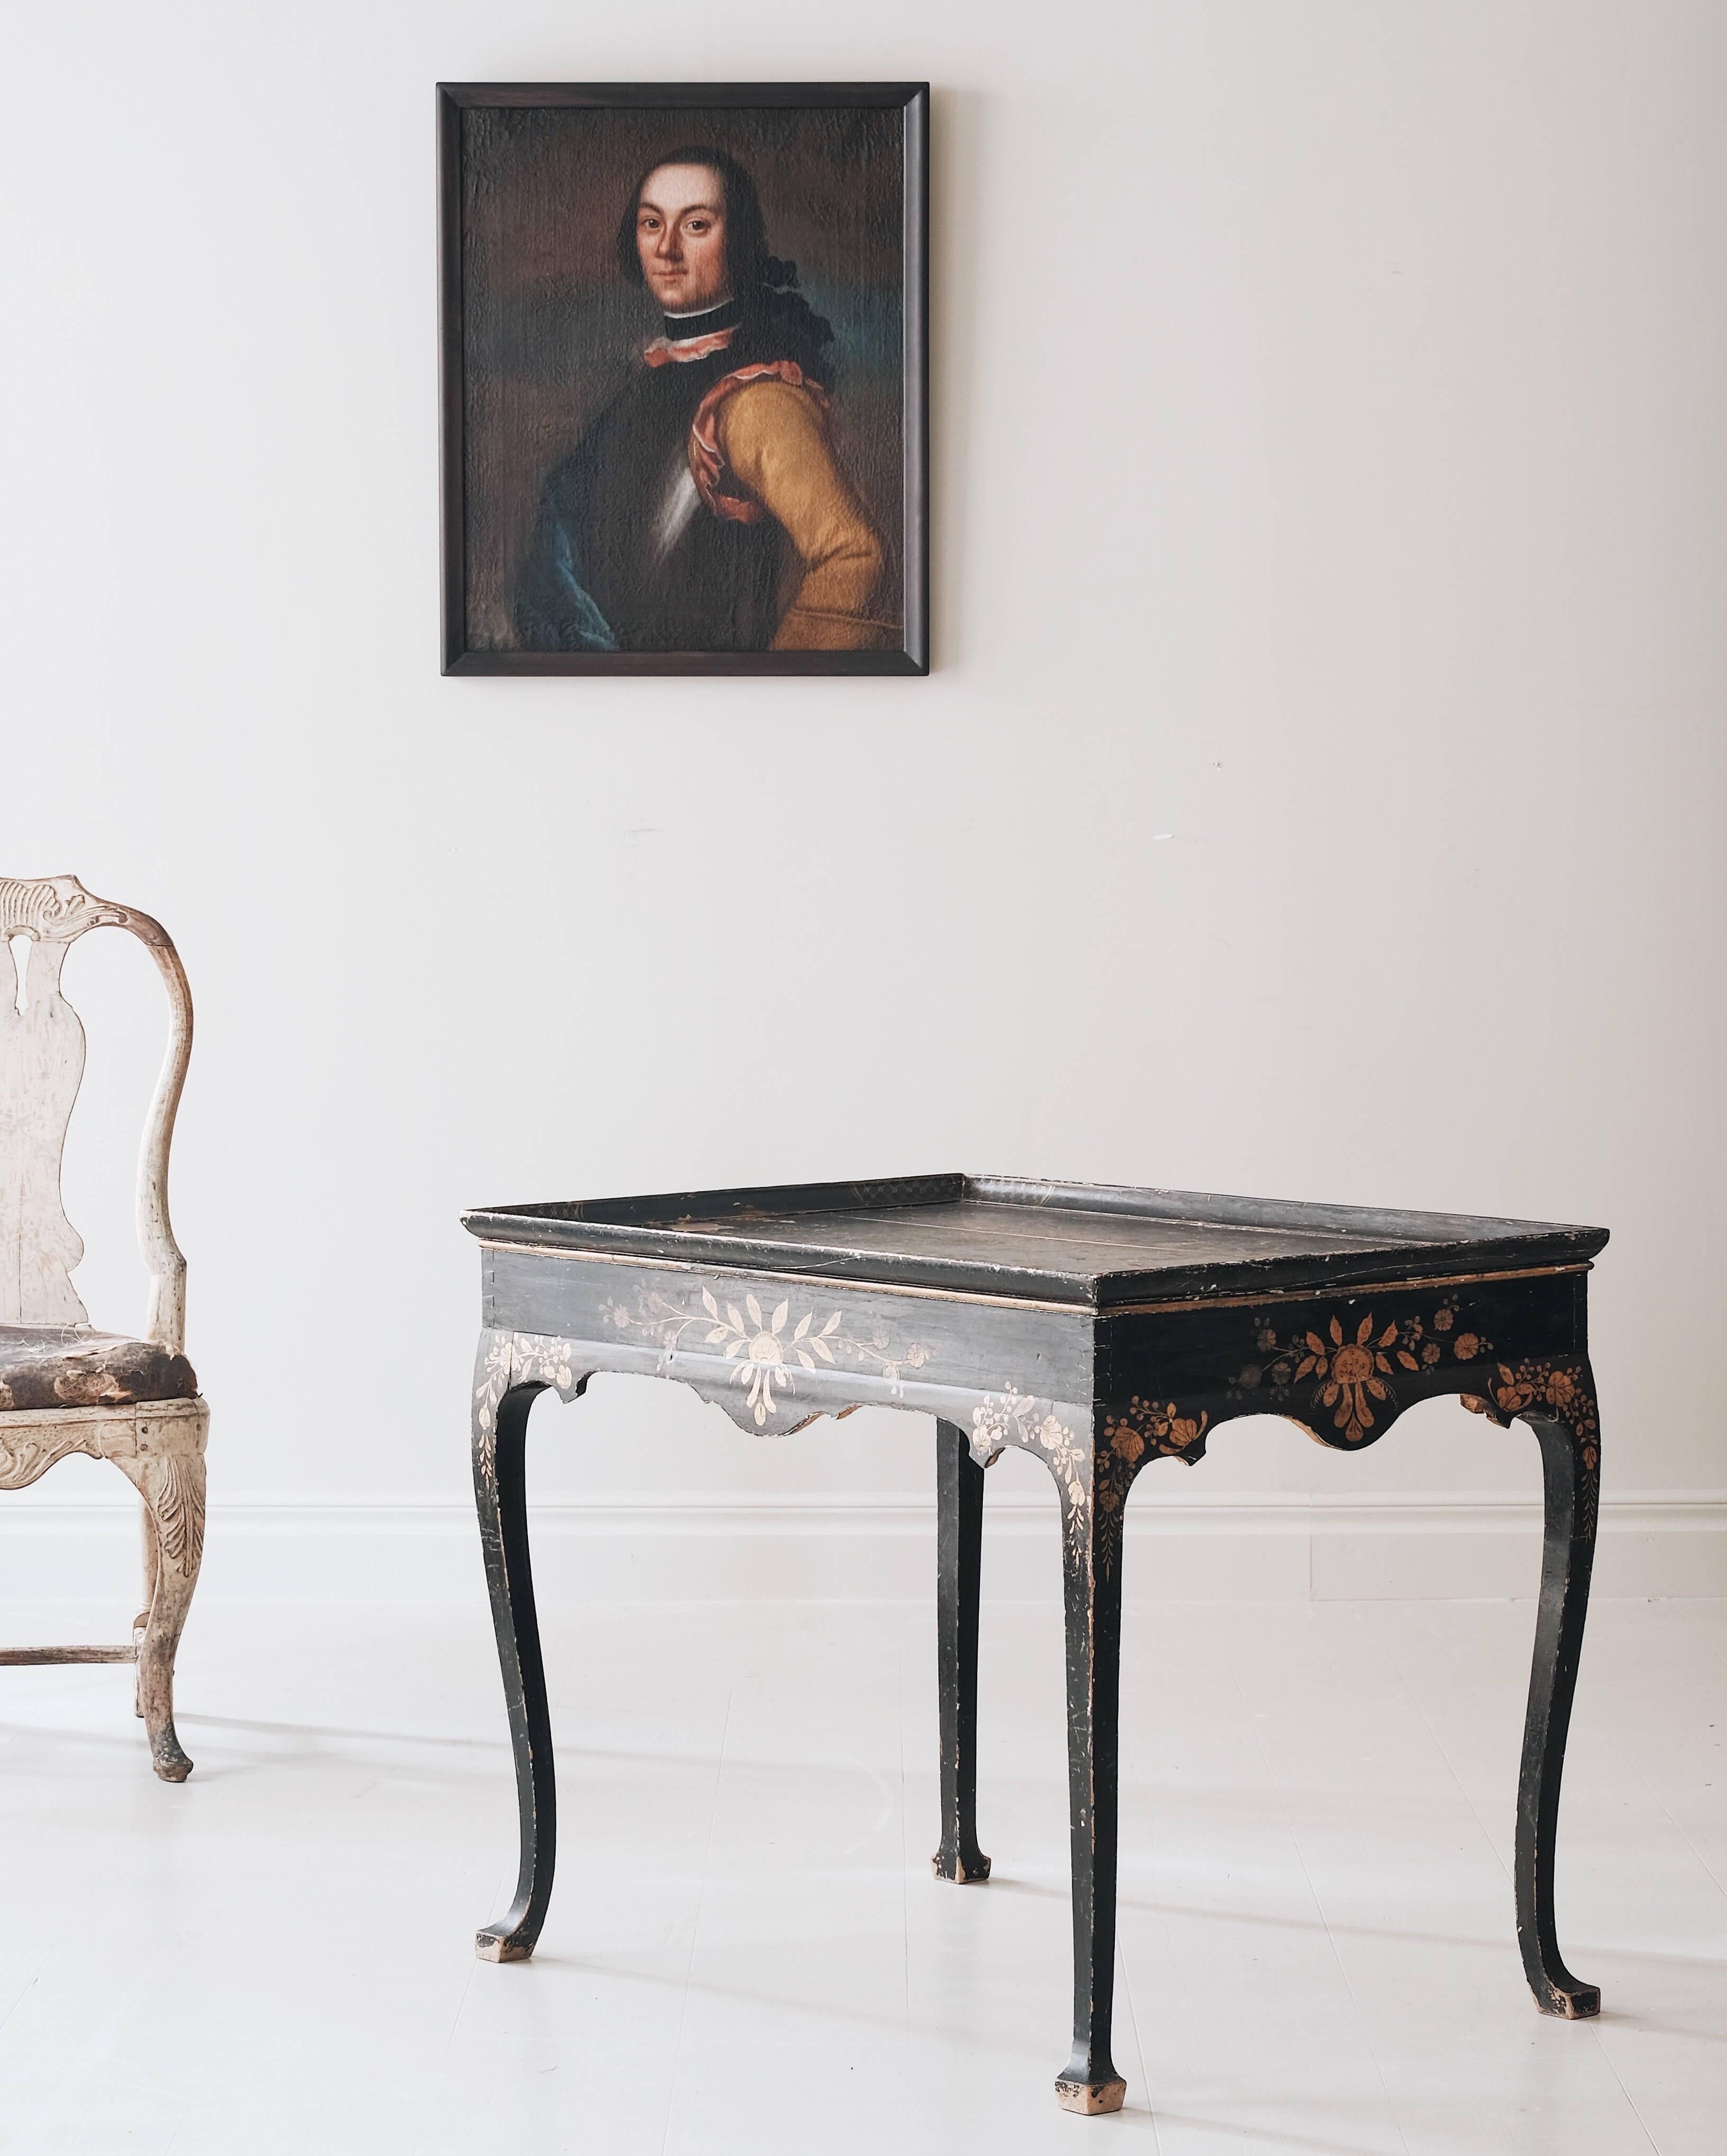 Fine Swedish 19th century estate made Rococo Revival chinoiserie tray table. Signed Biby fideikommiss (Biby entailed estate), circa 1830.

Provenience: Biby Mansion and the Von Celsing family.